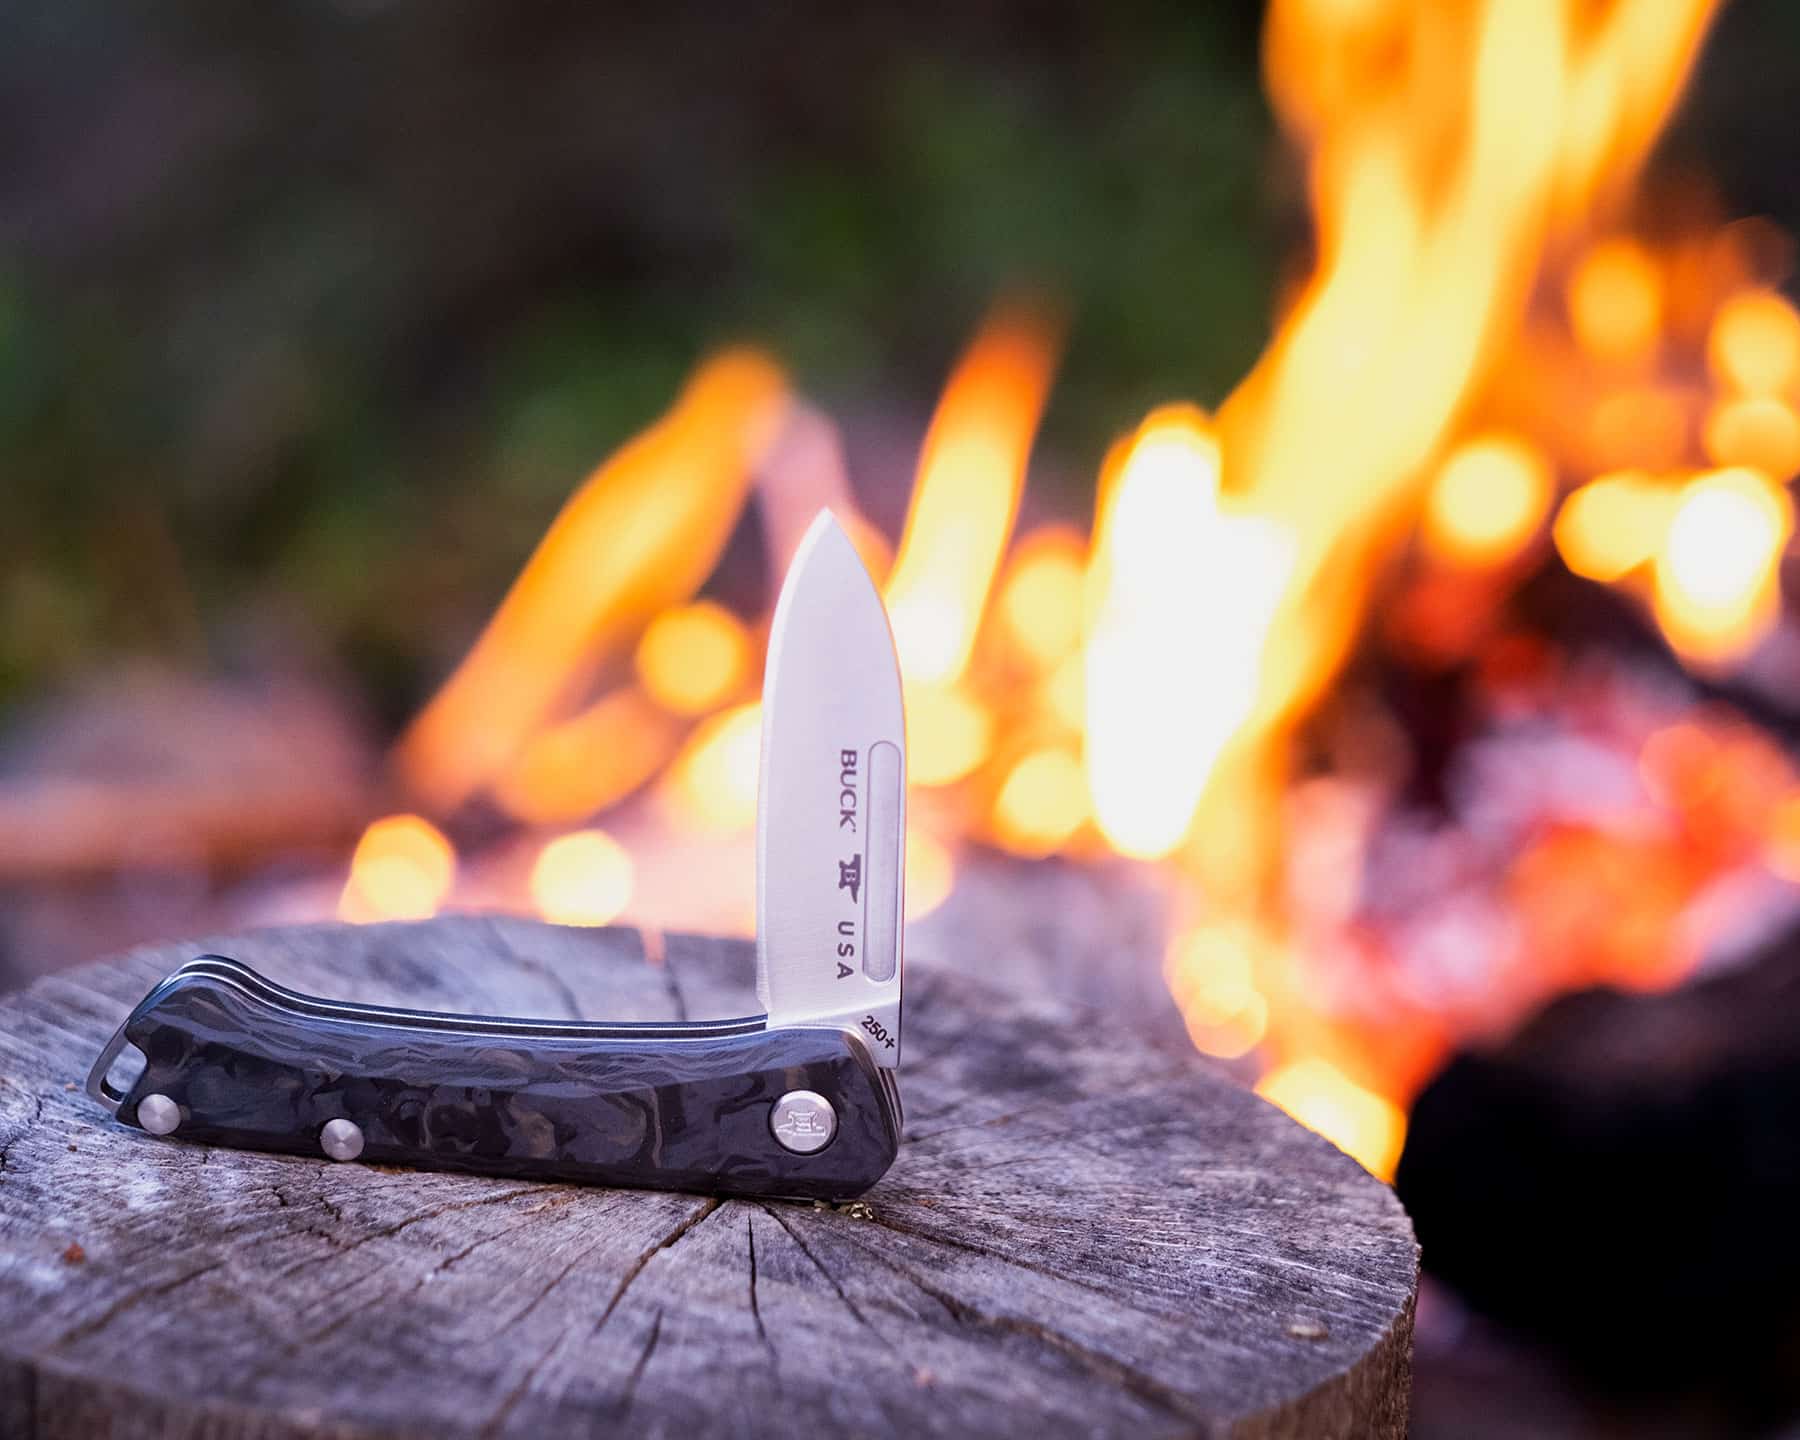 The Buck Saunter is a practical pocket knife for both the office or the outdoors. It is shown here next to a campfire.